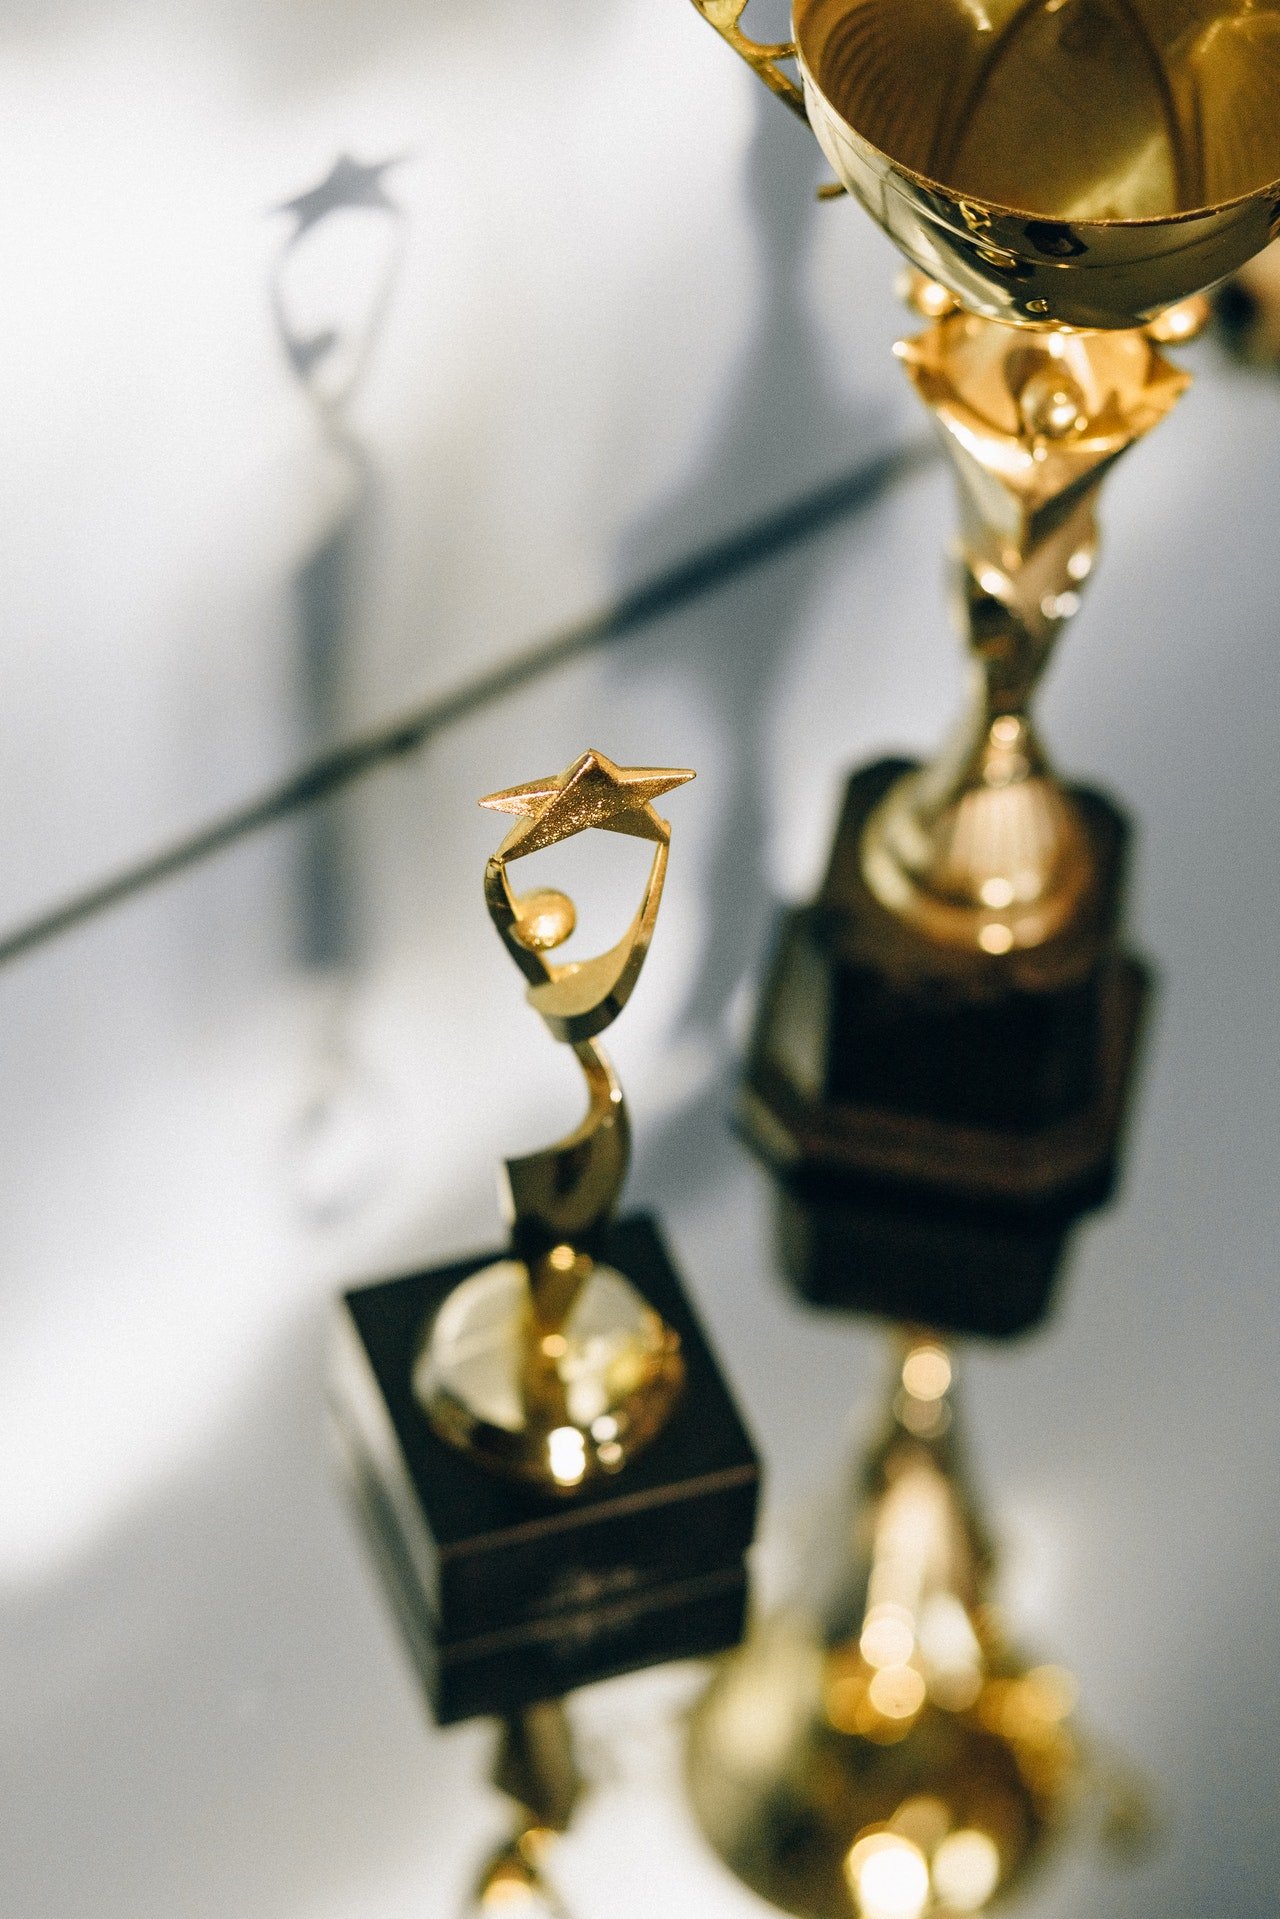 Jeremiah won the award and the prize money. | Source: Pexels